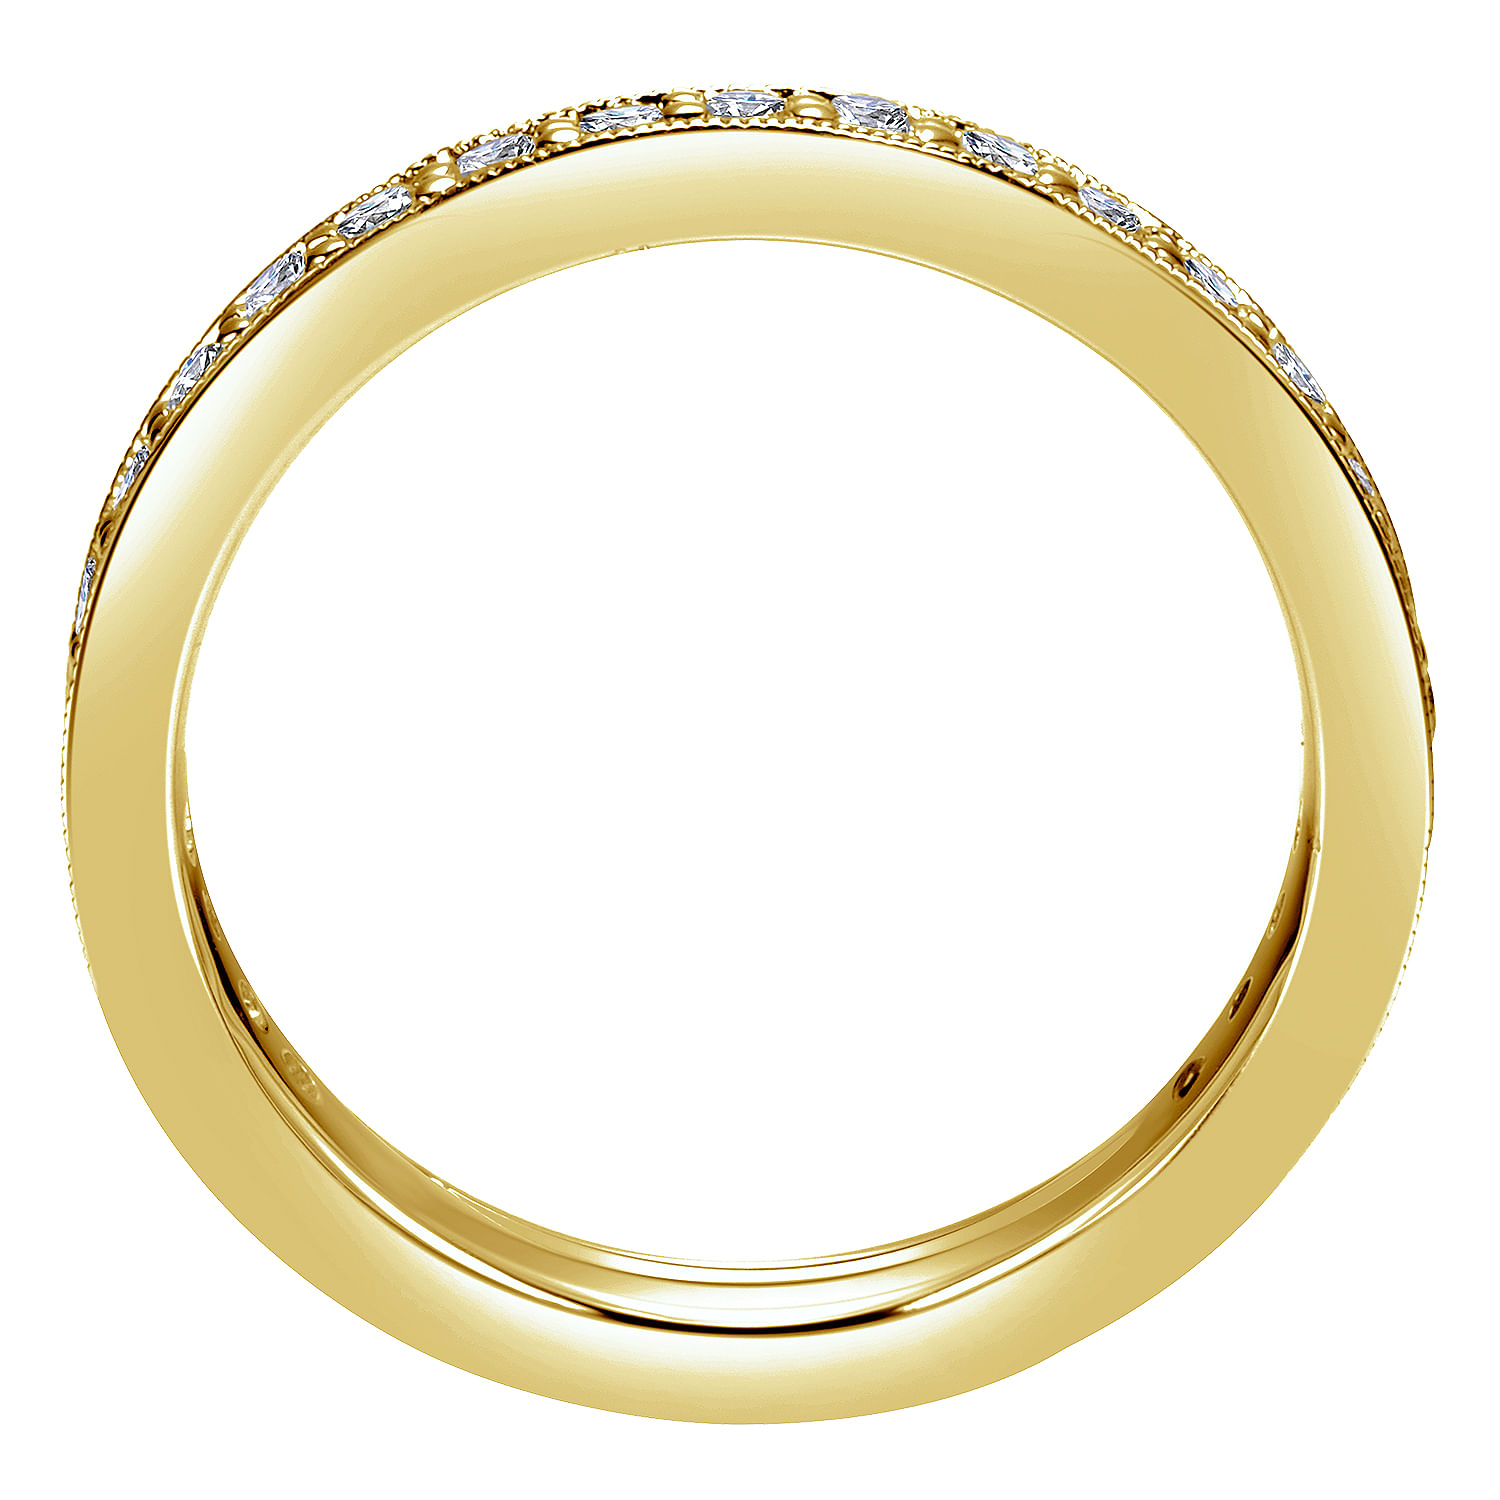 14K Yellow Gold Channel Prong Diamond Eternity Band with Milgrain